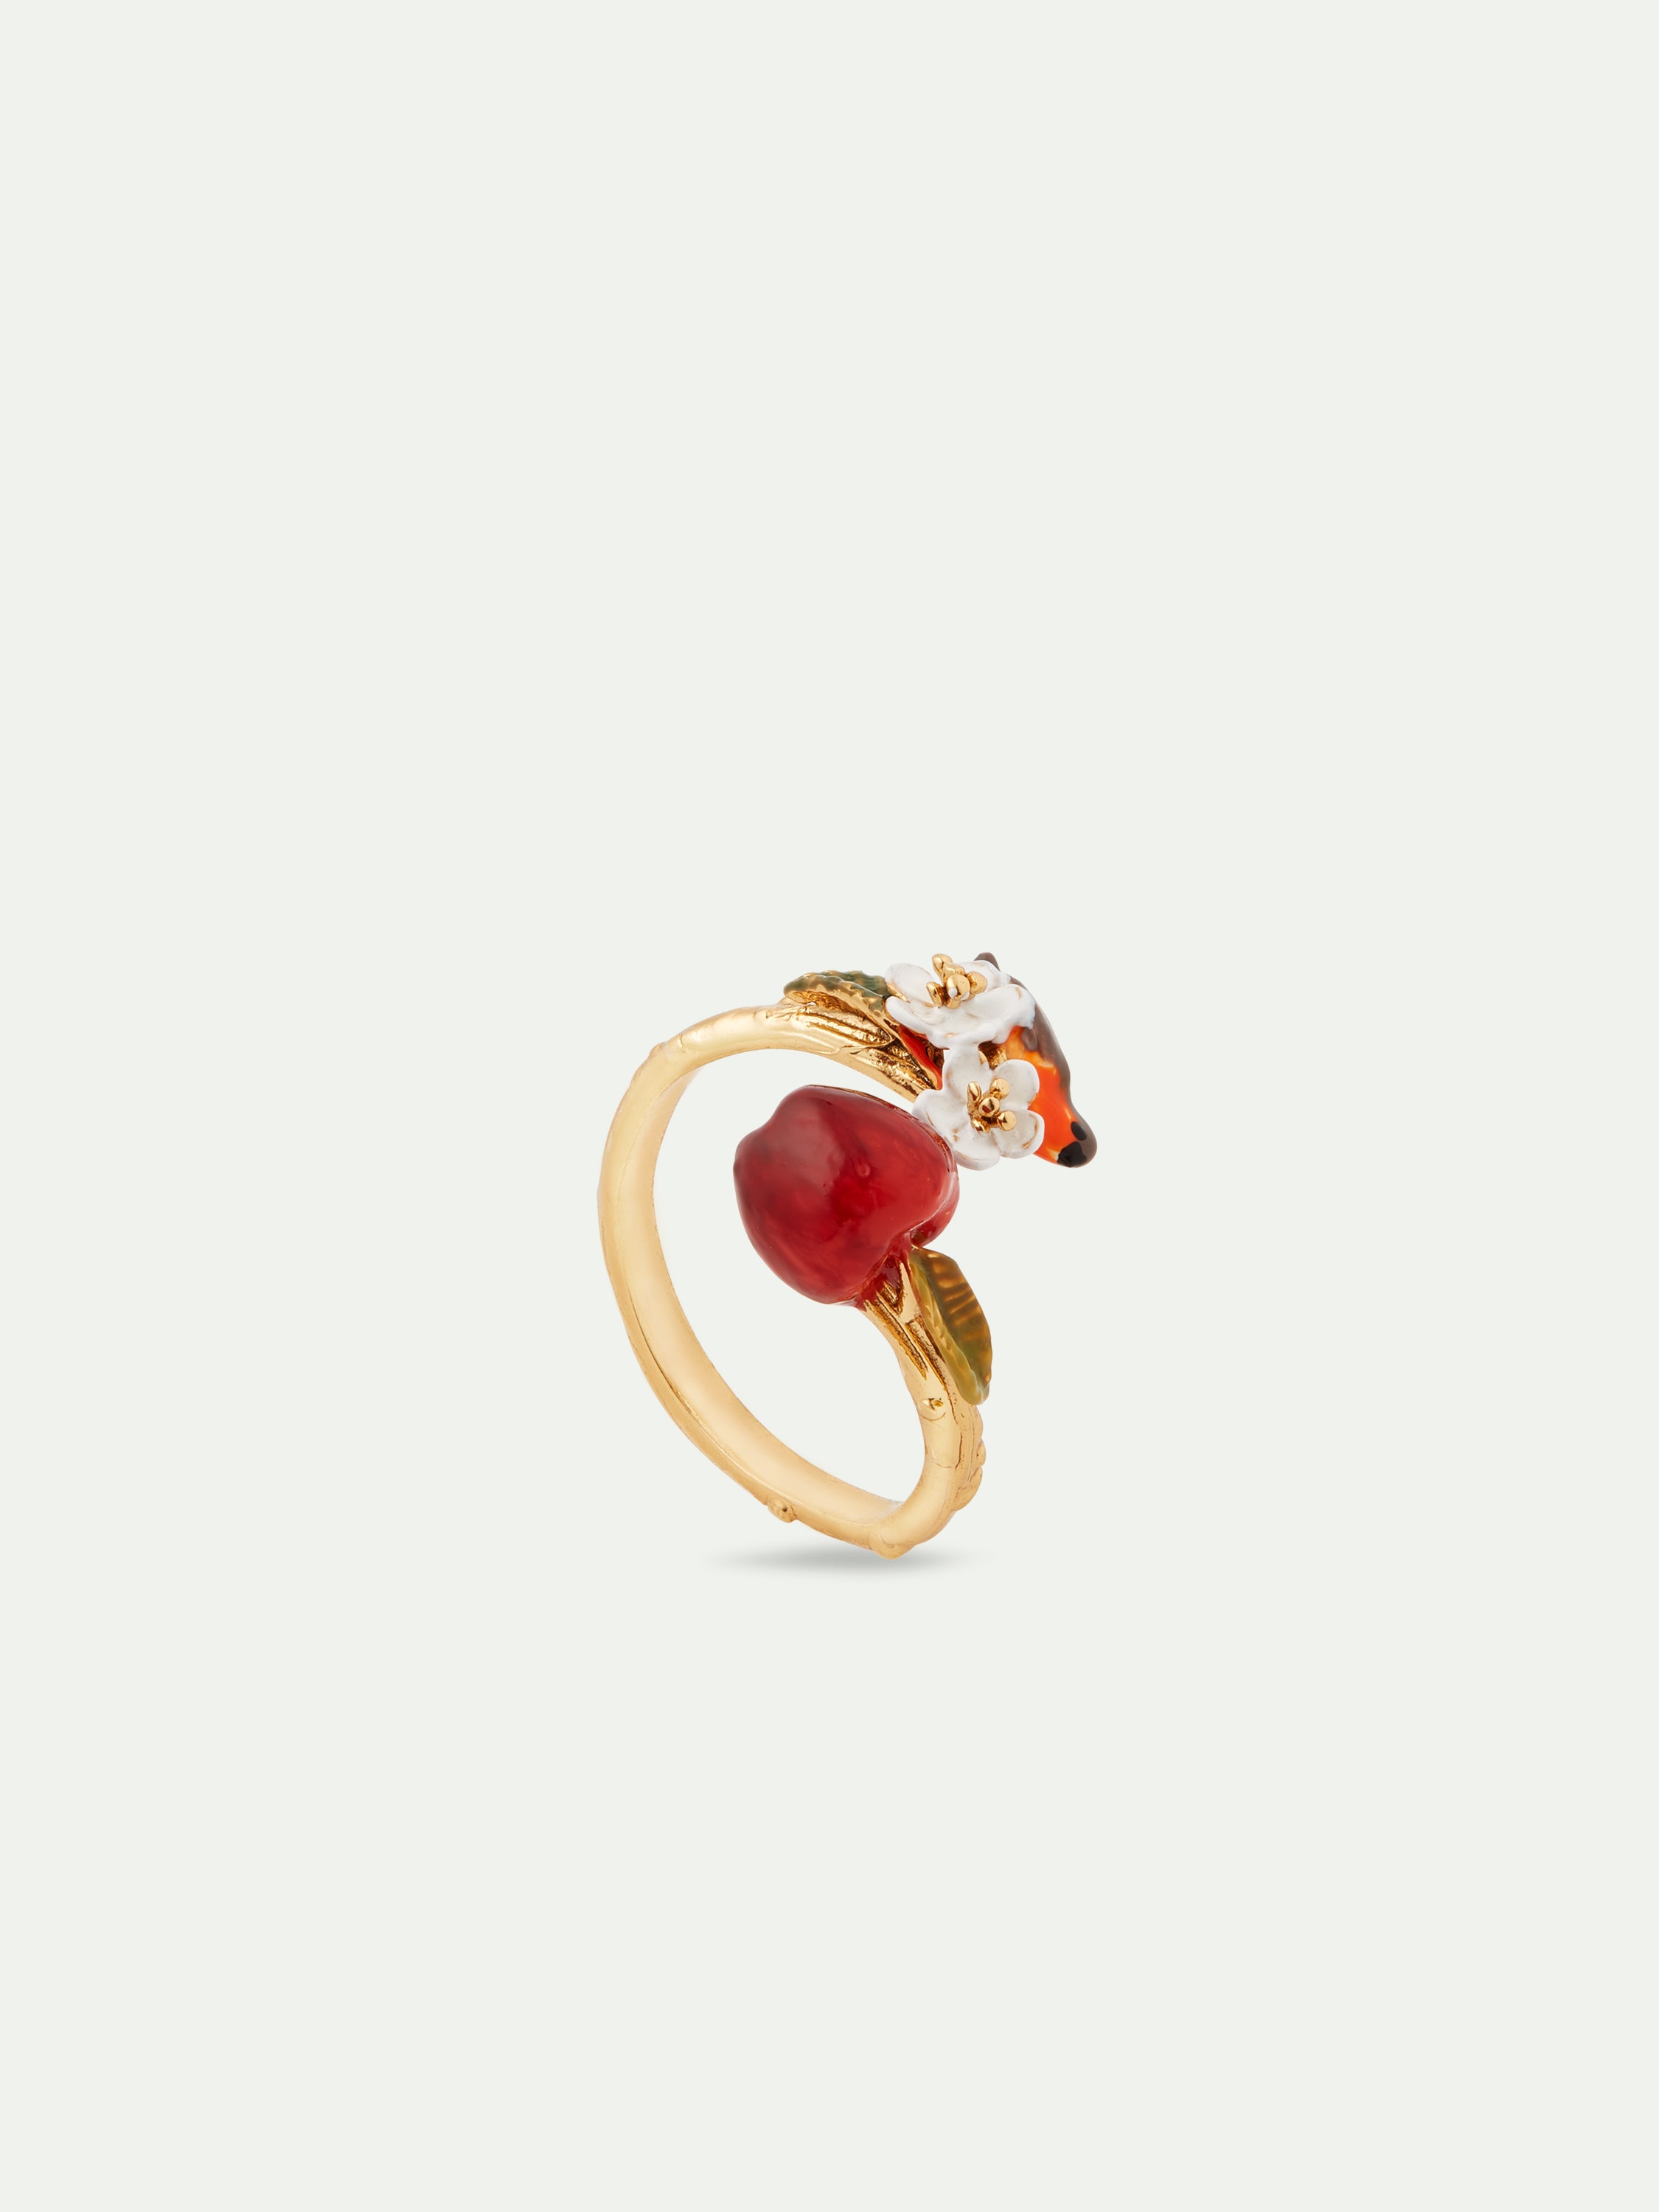 Robin and apple adjustable ring